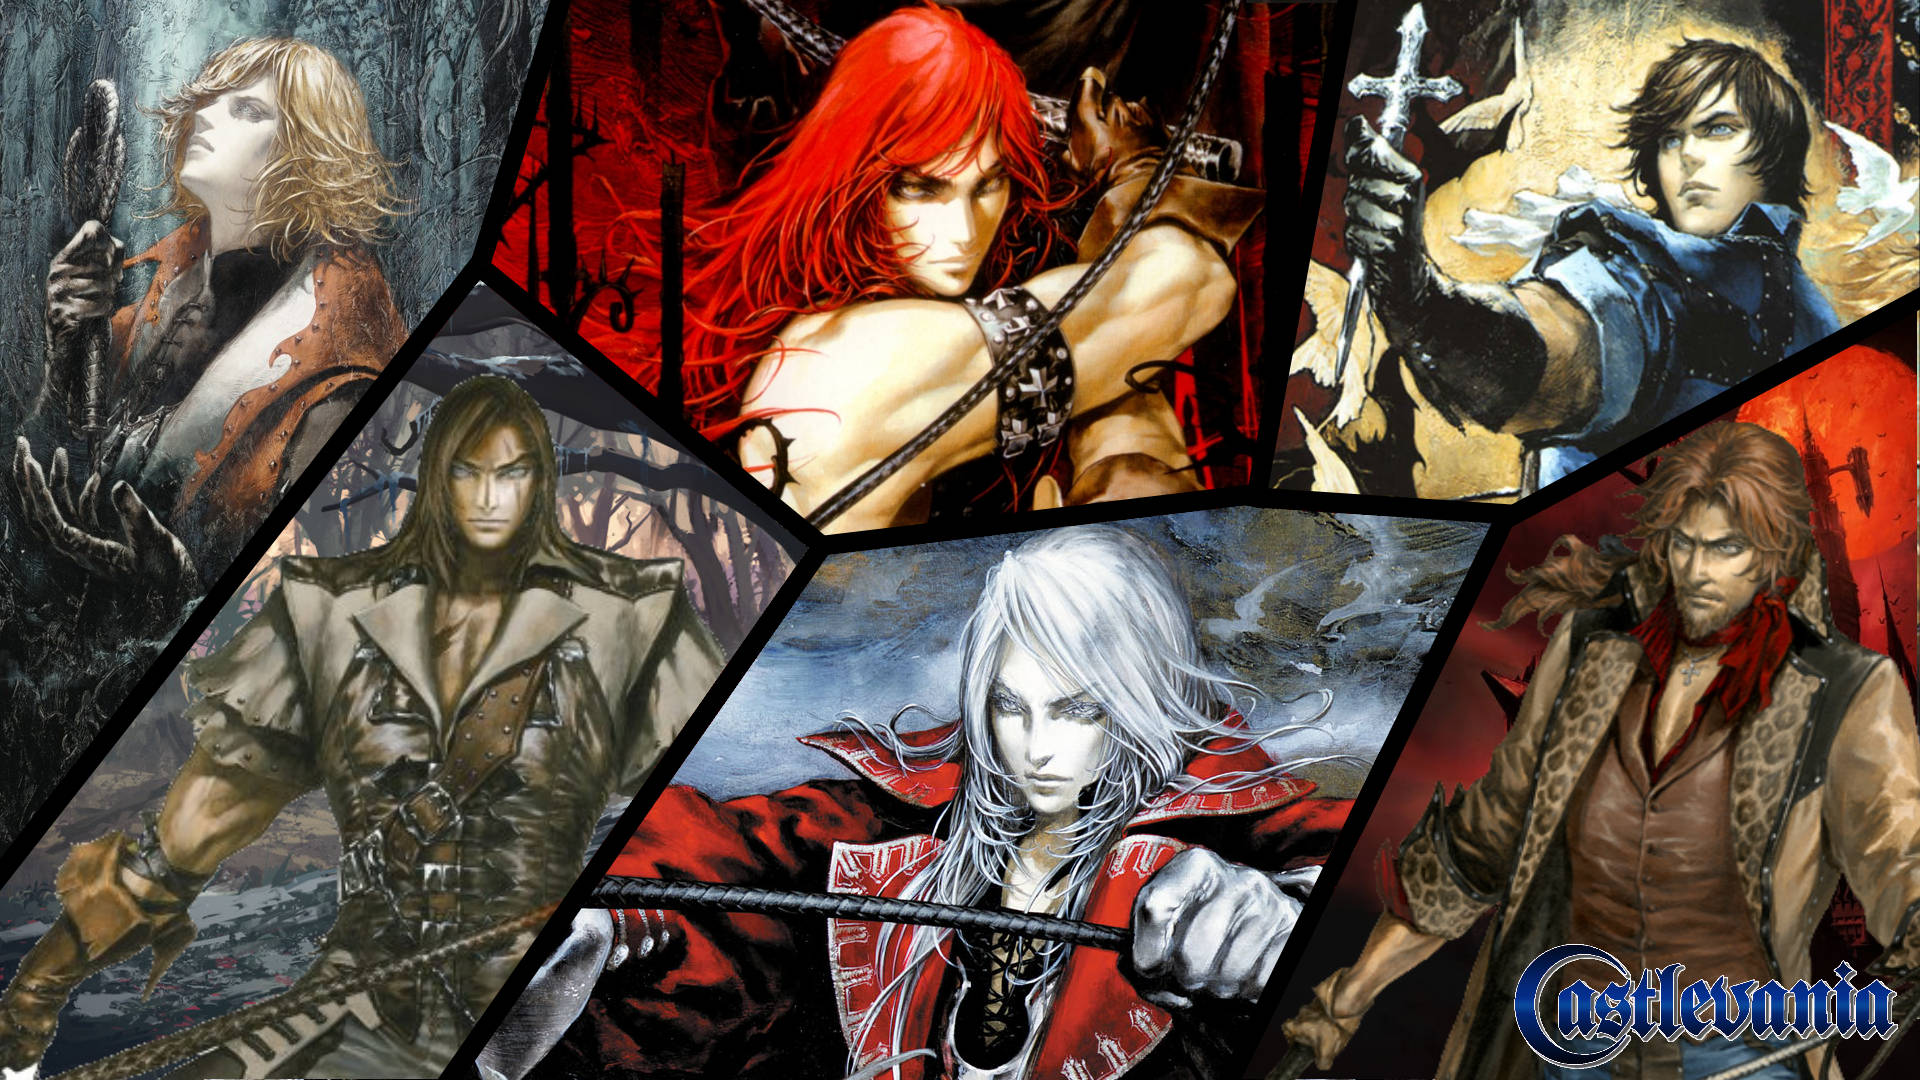 The Belmont Family's proud banners fly proud over Castlevania Wallpaper